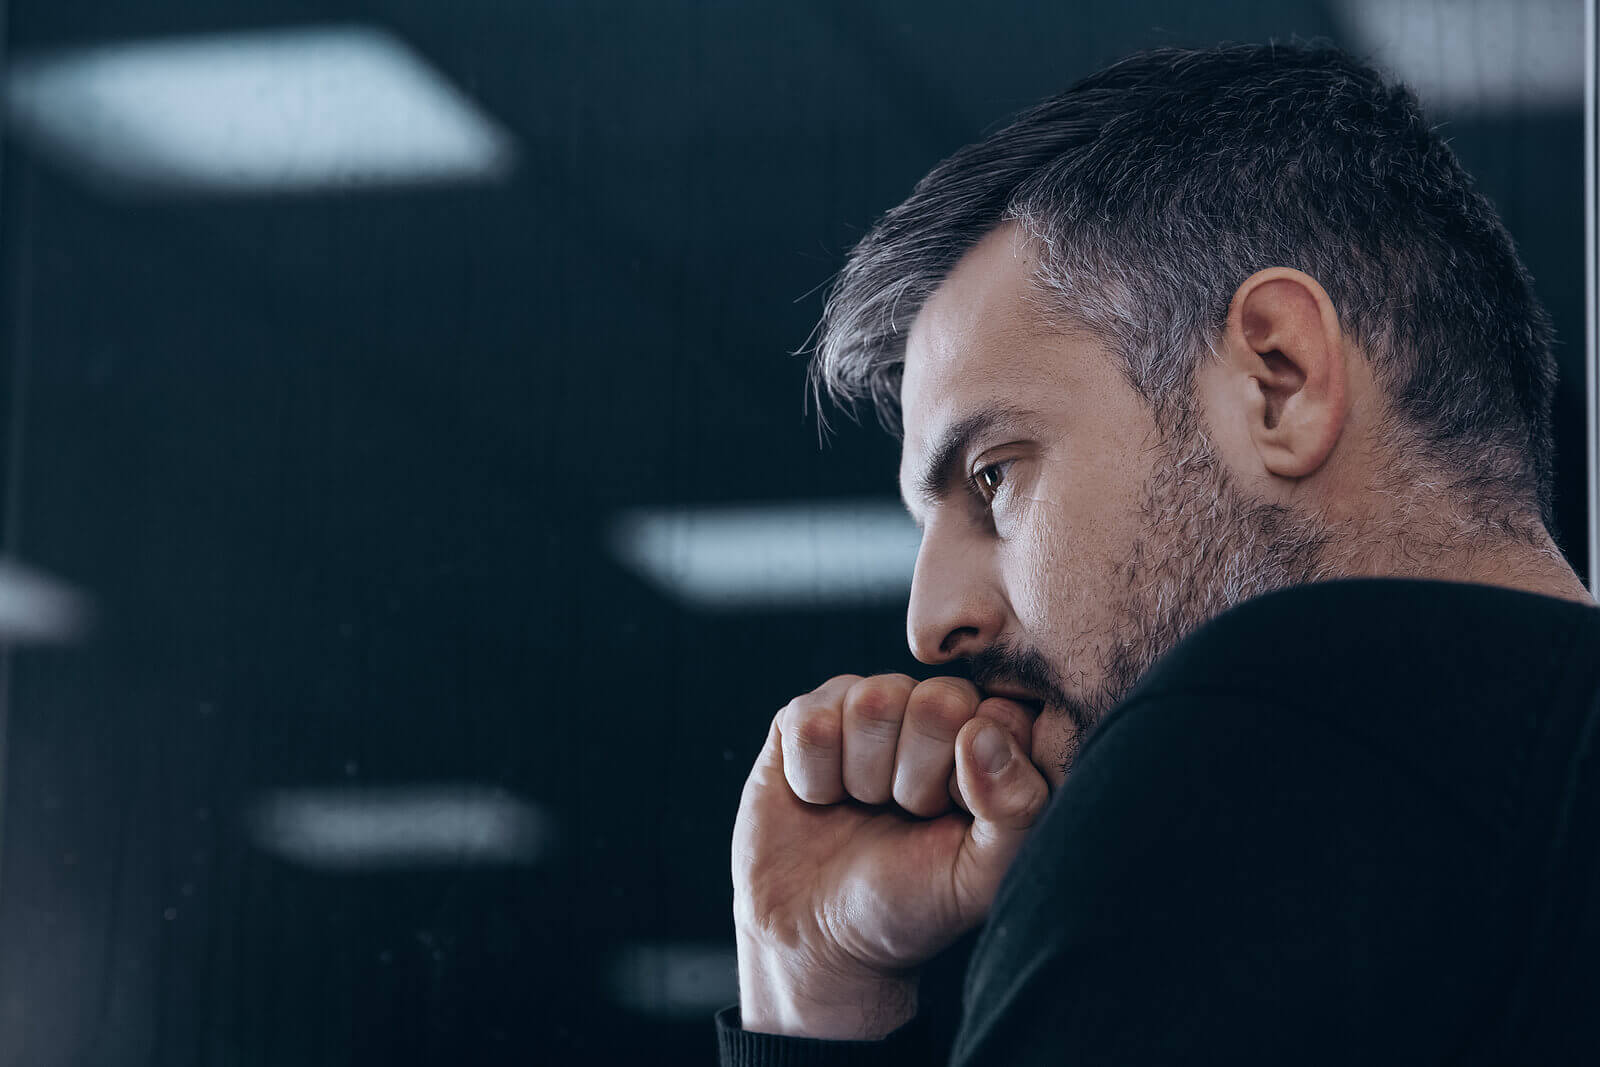 Photo of a man sitting with his hand on his chin looking like he is in thought. Struggling with bad behaviors? With dbt therapy in Georgia you can learn the skills to control unwanted behaviors.